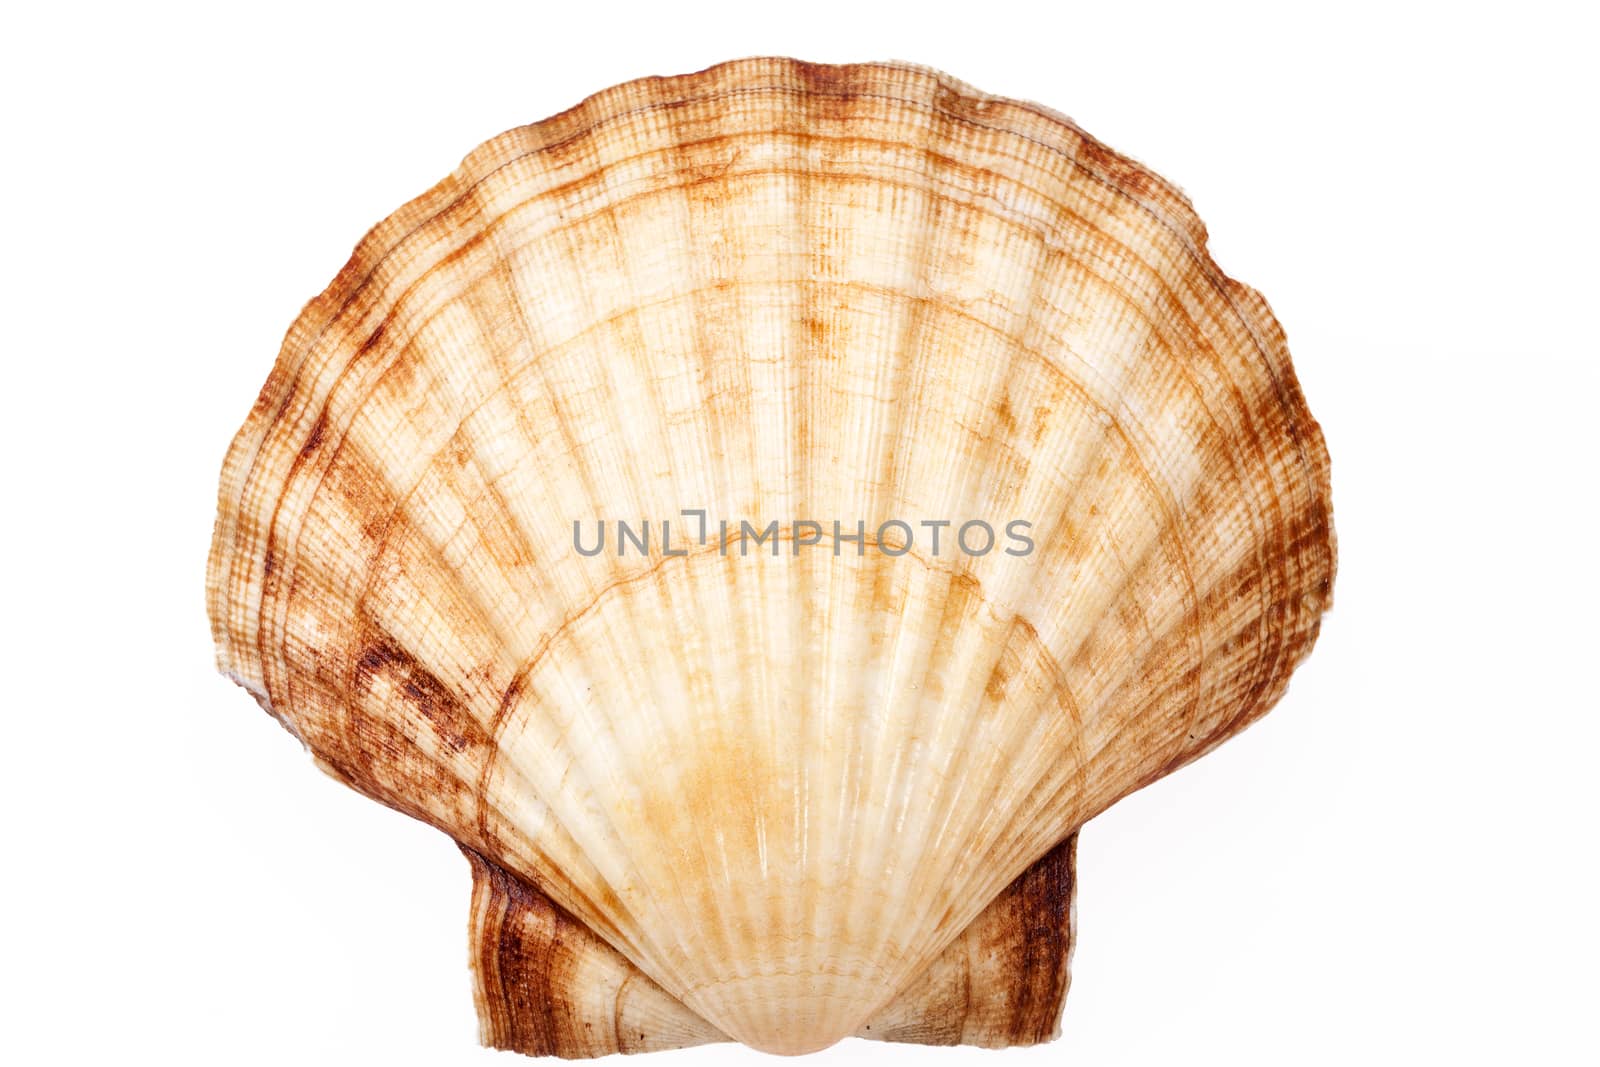 single sea shell of mollusk isolated on white background by mychadre77